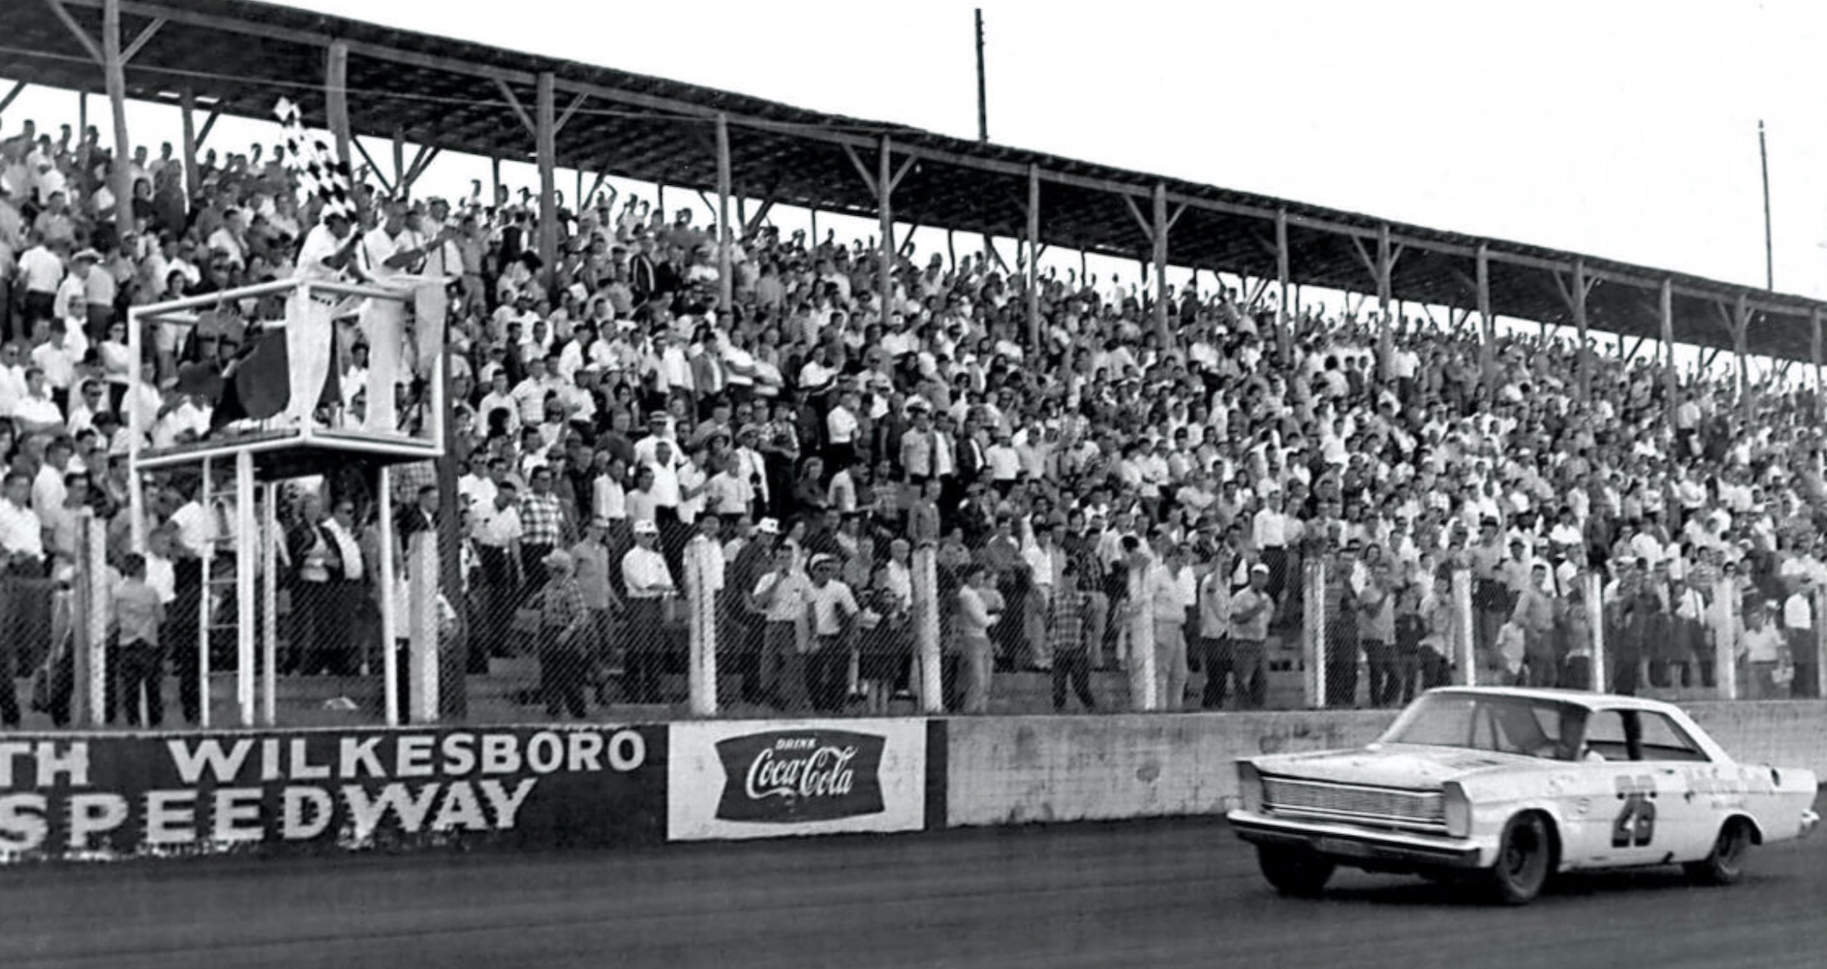 North Wilkesboro Speedway, one of the original NASCAR tracks. Junior Johnson, the “Wilkes County Wildman,” took the checkered flag in this 1965 race.